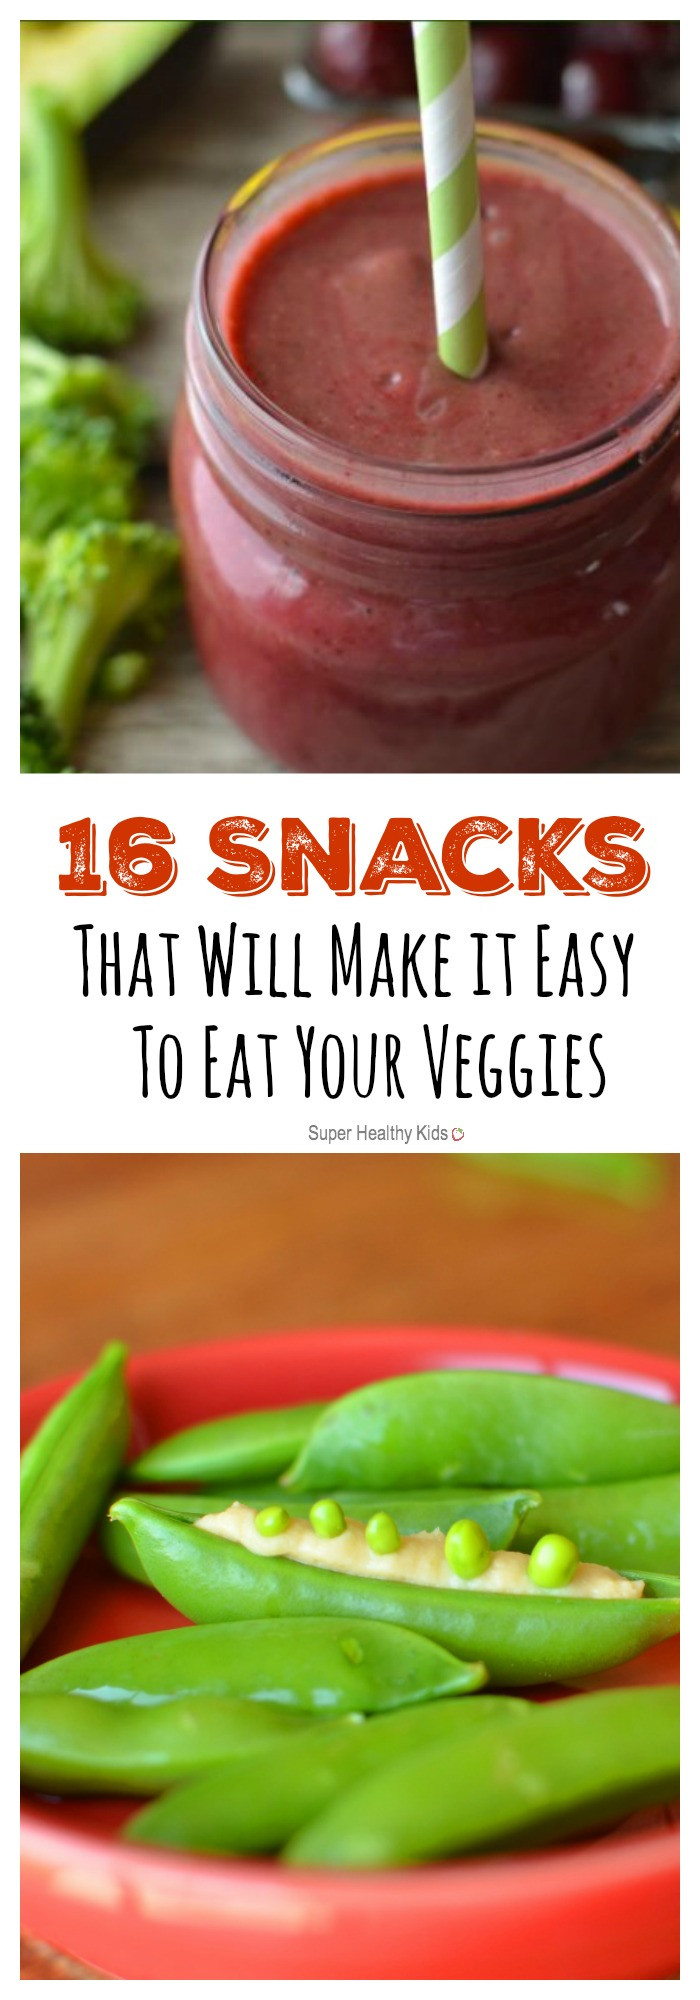 Yummy Healthy Snacks
 16 Snacks That Will Make it Easy To Eat Your Veggies